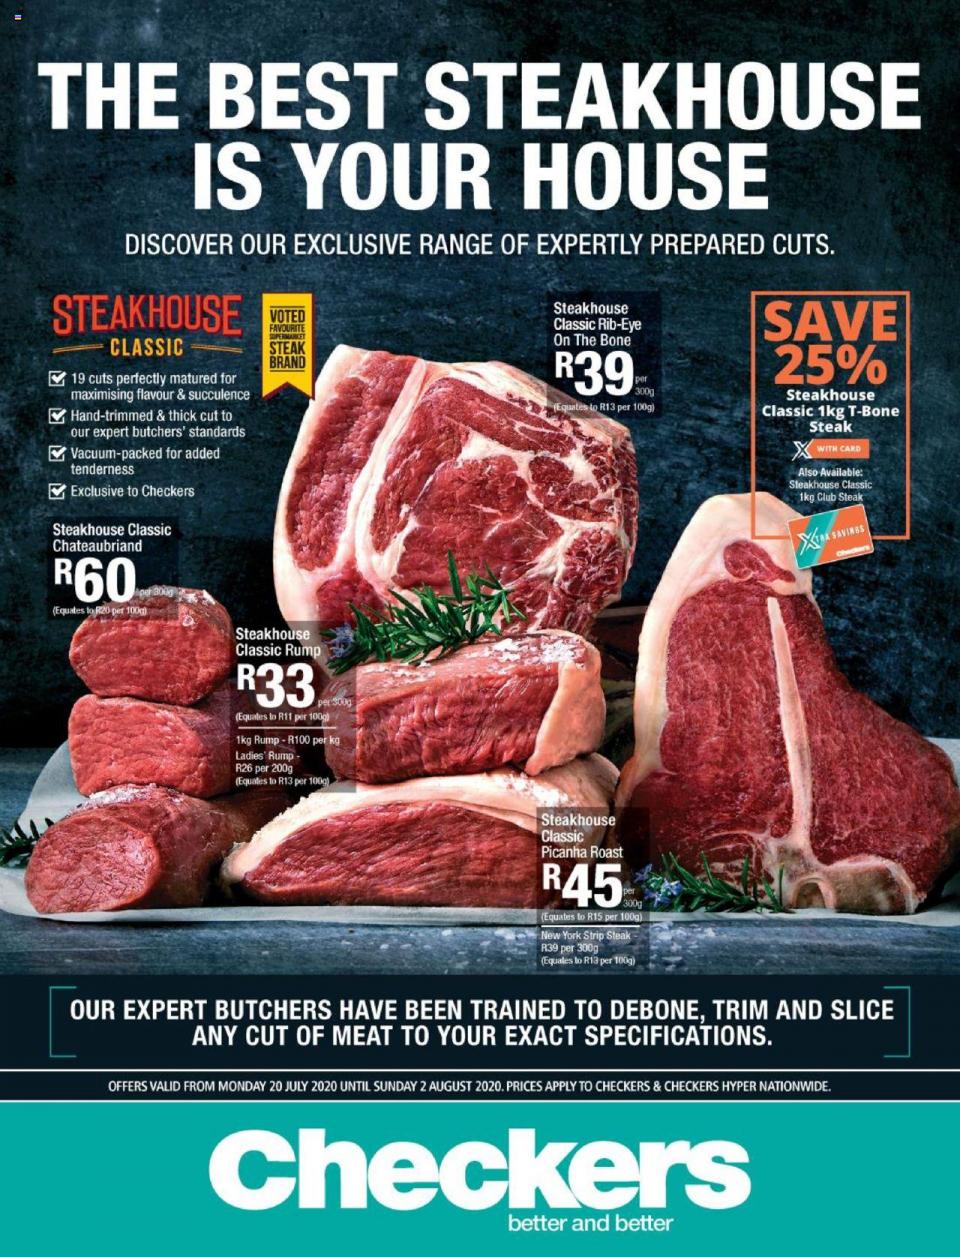 Checkers Specials Butchery Promotion 20 July 2020